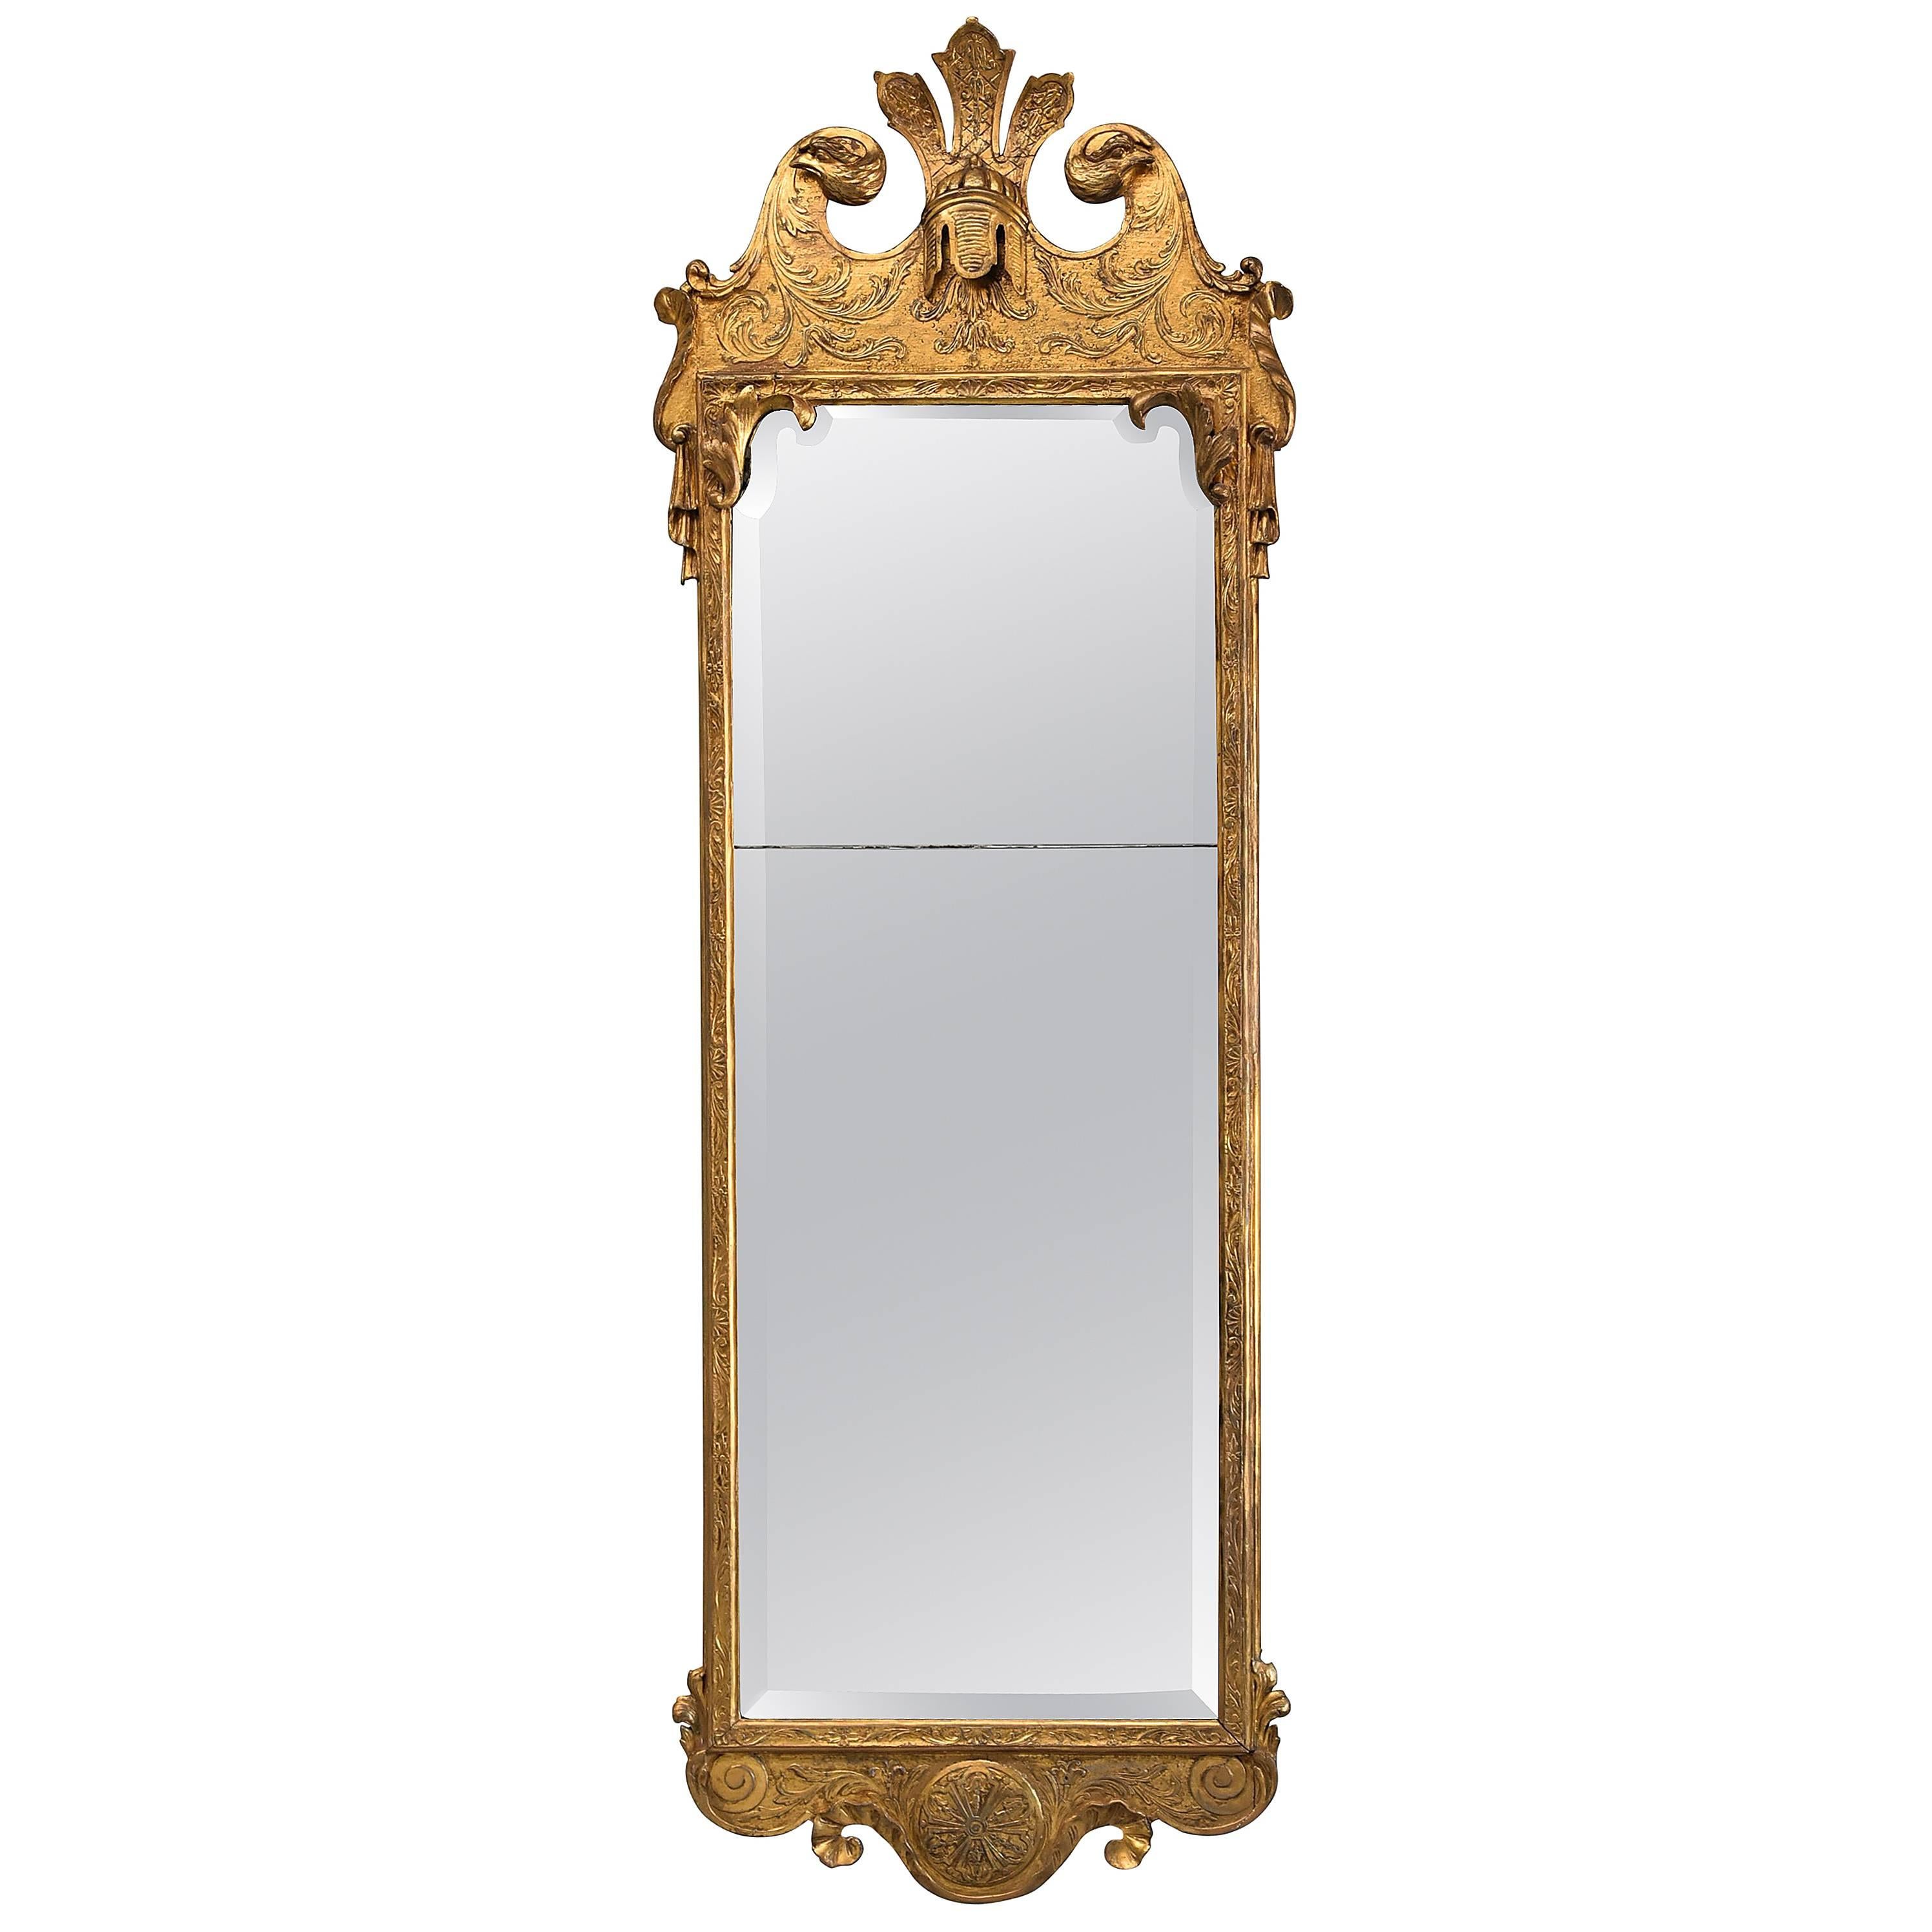 Early 18th Century George I Giltwood & Pier Mirror, in the Manner of J Belchier For Sale